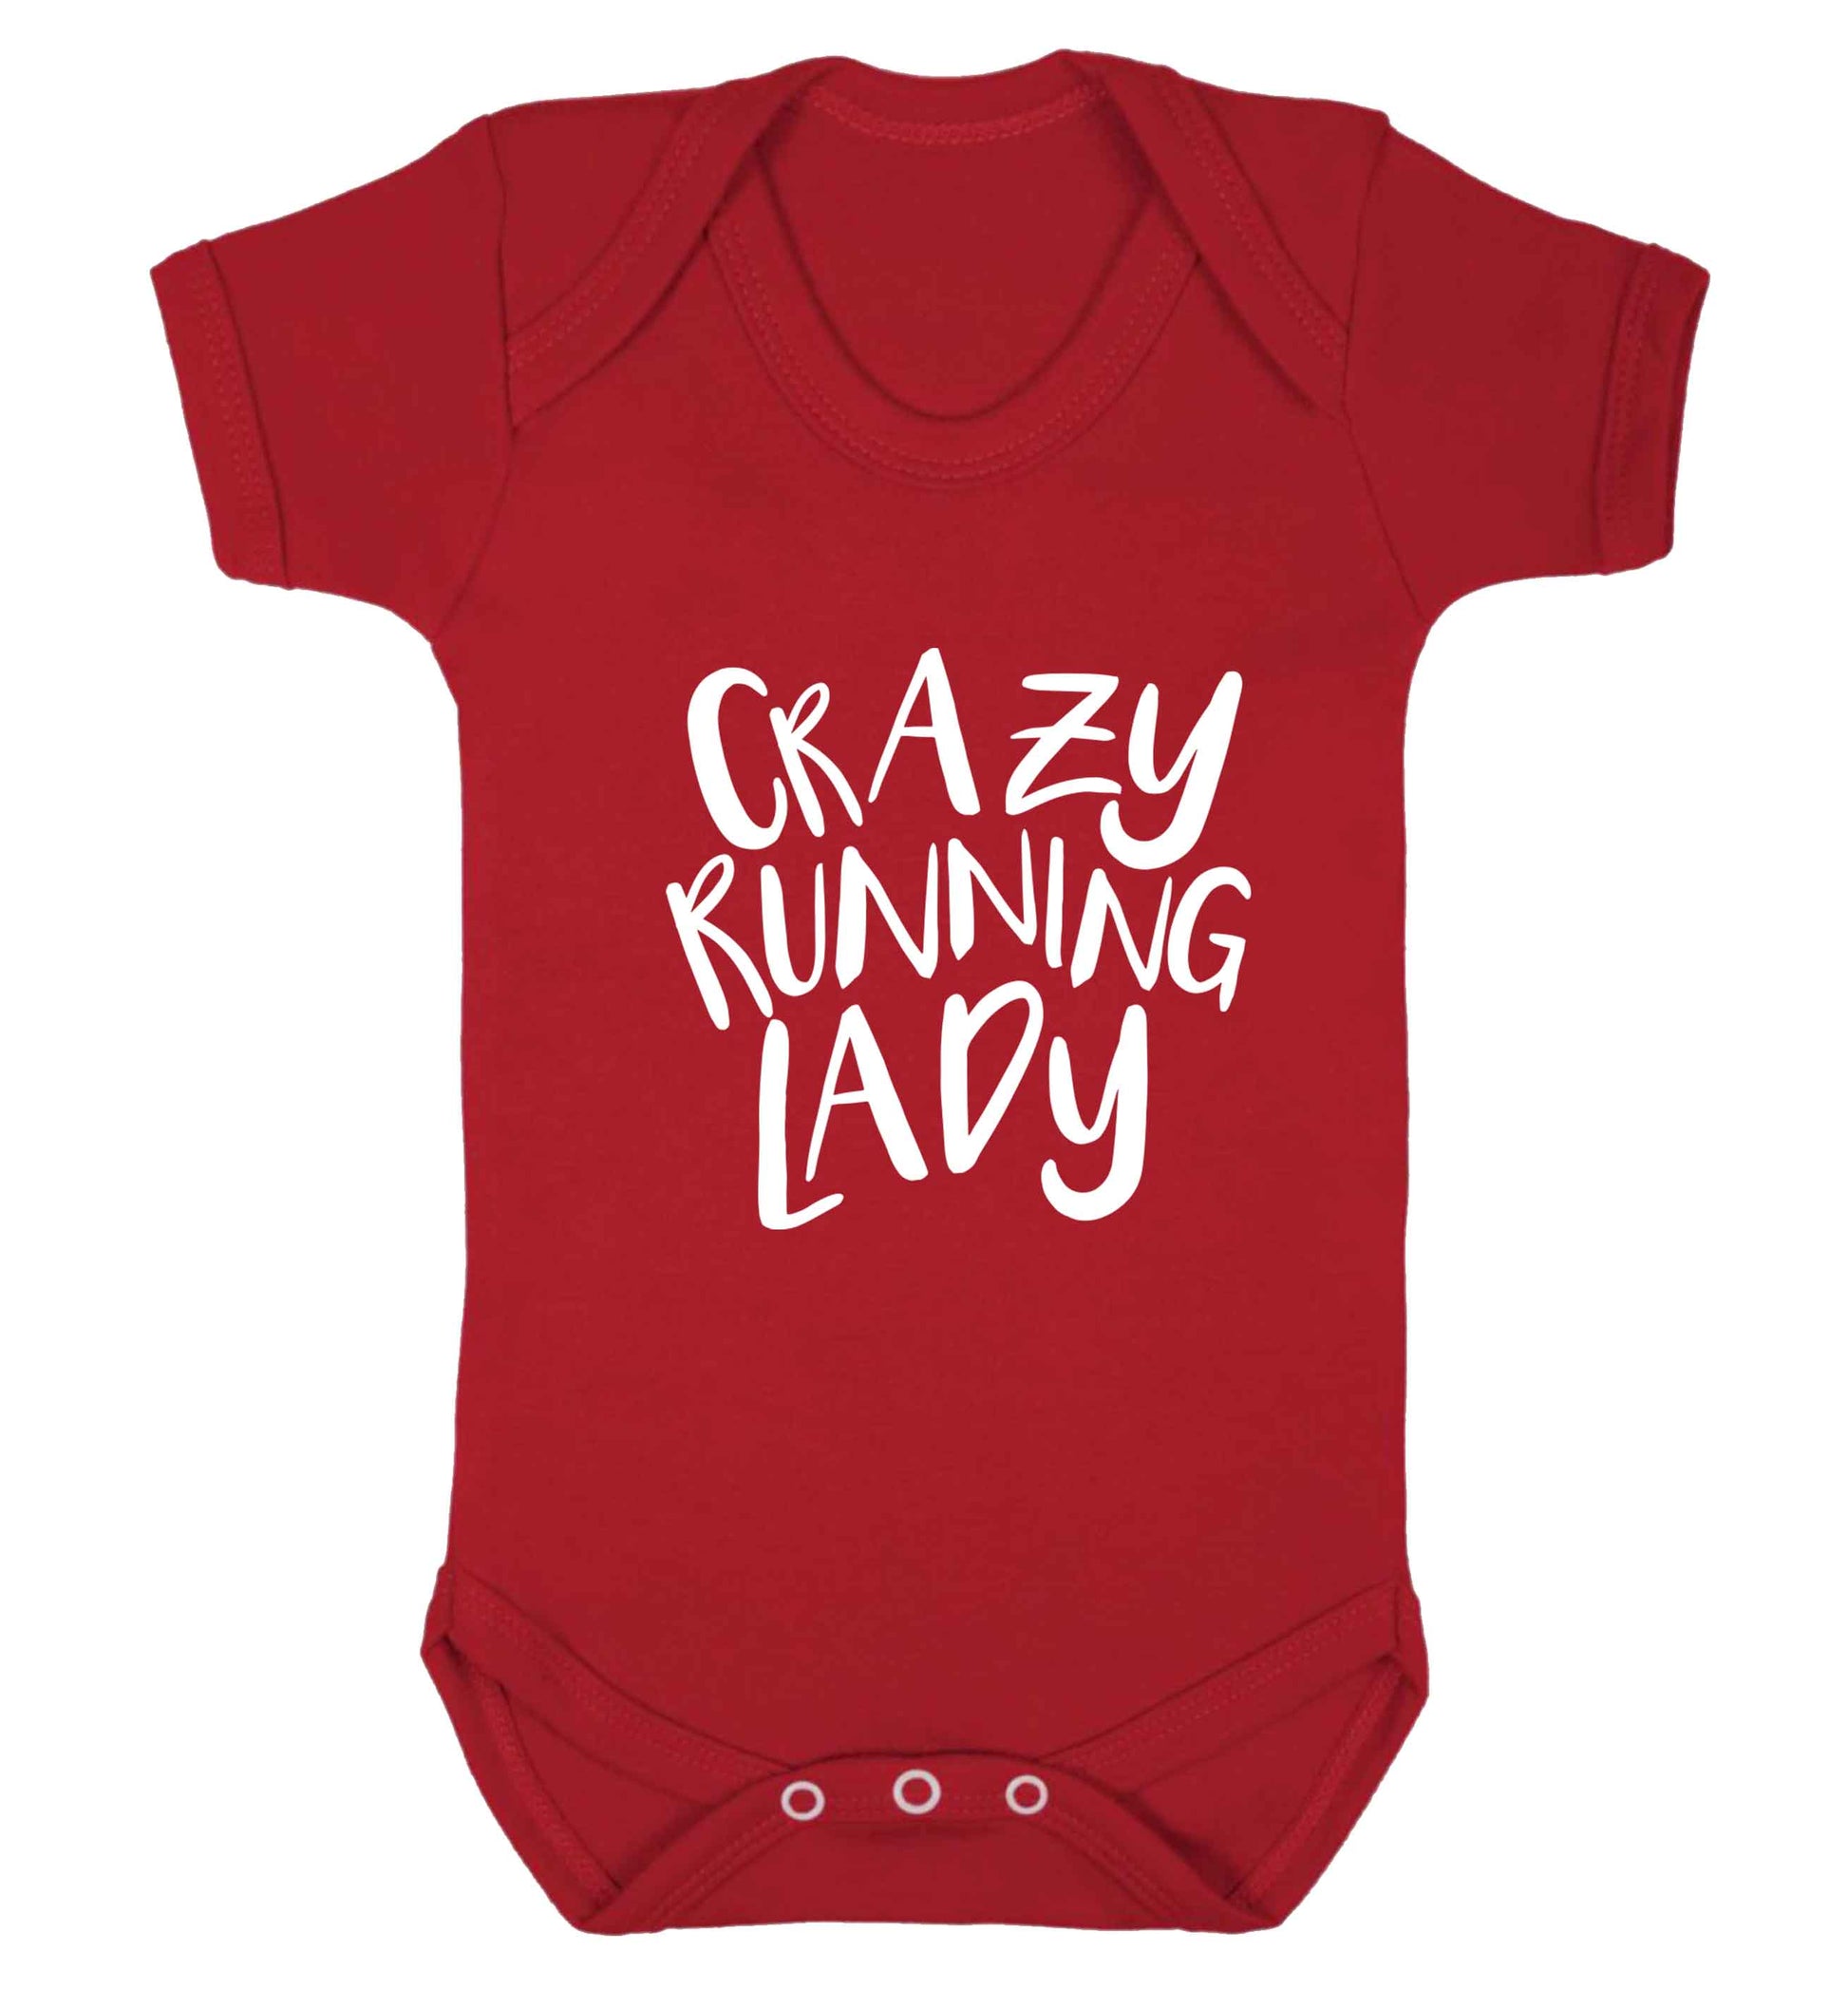 Crazy running lady baby vest red 18-24 months